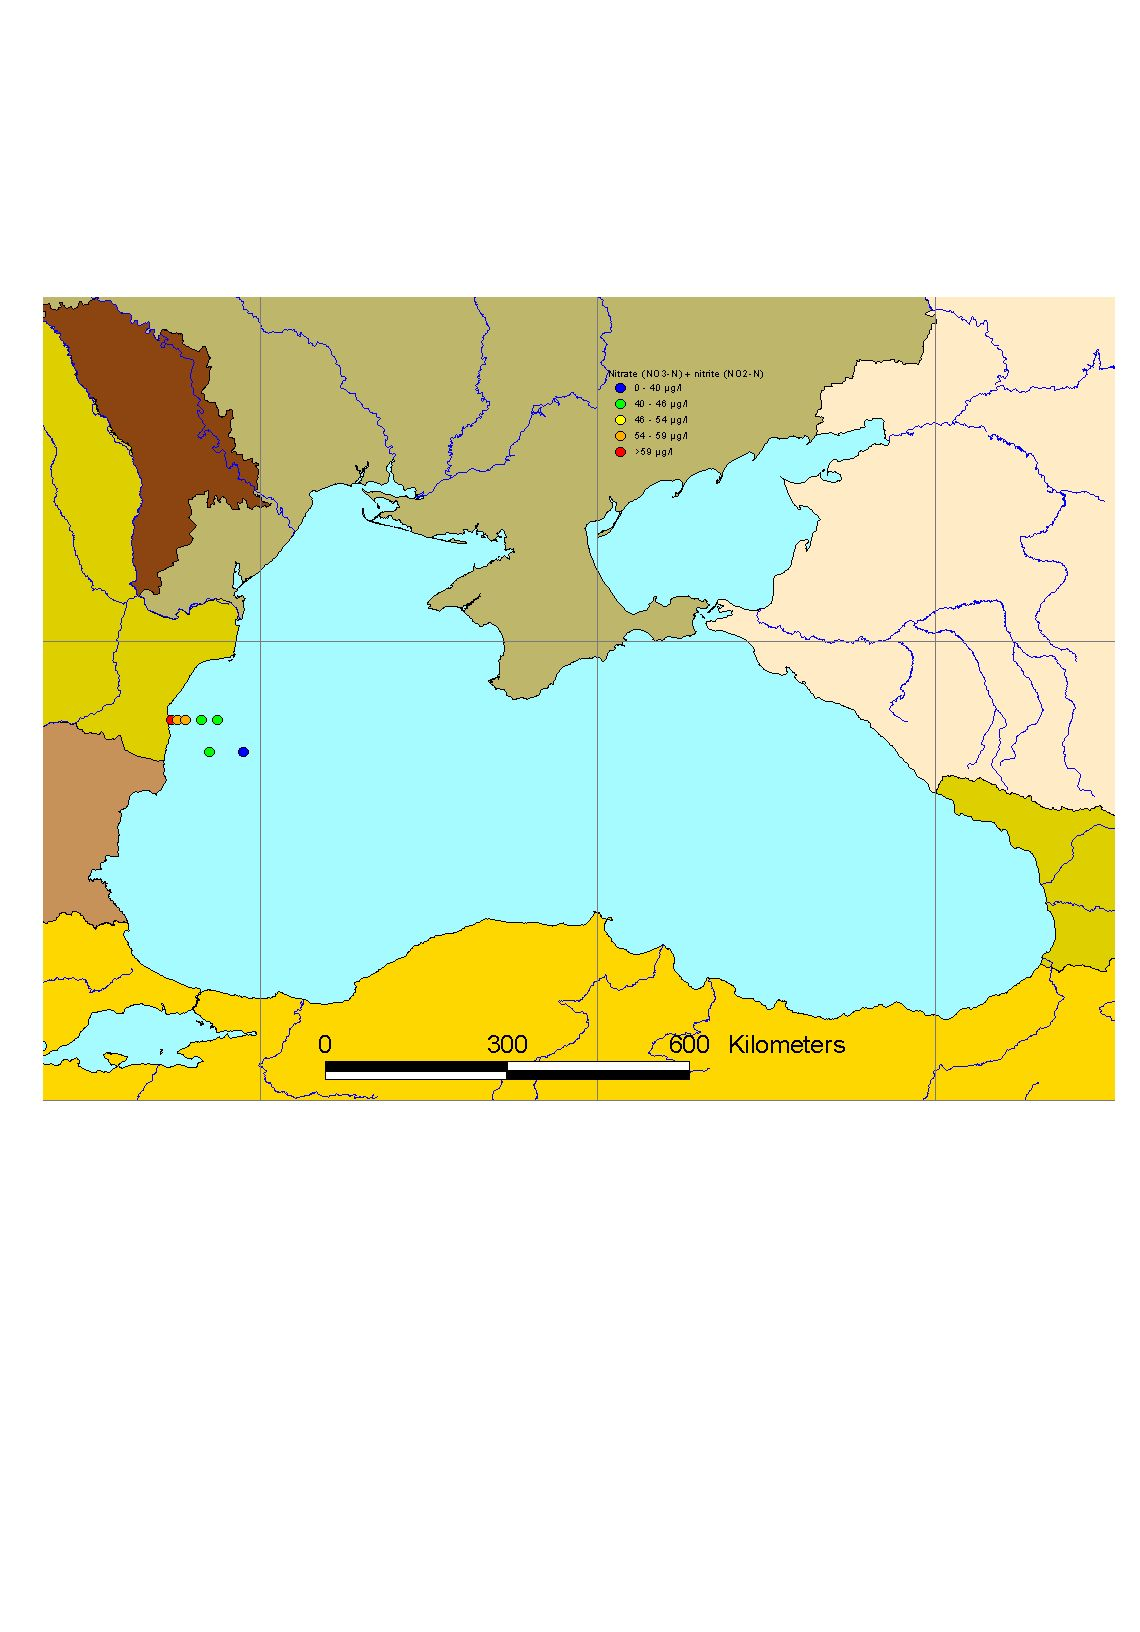 Mean winter surface concentrations of nitrate+nitrite in the Black Sea, 2003